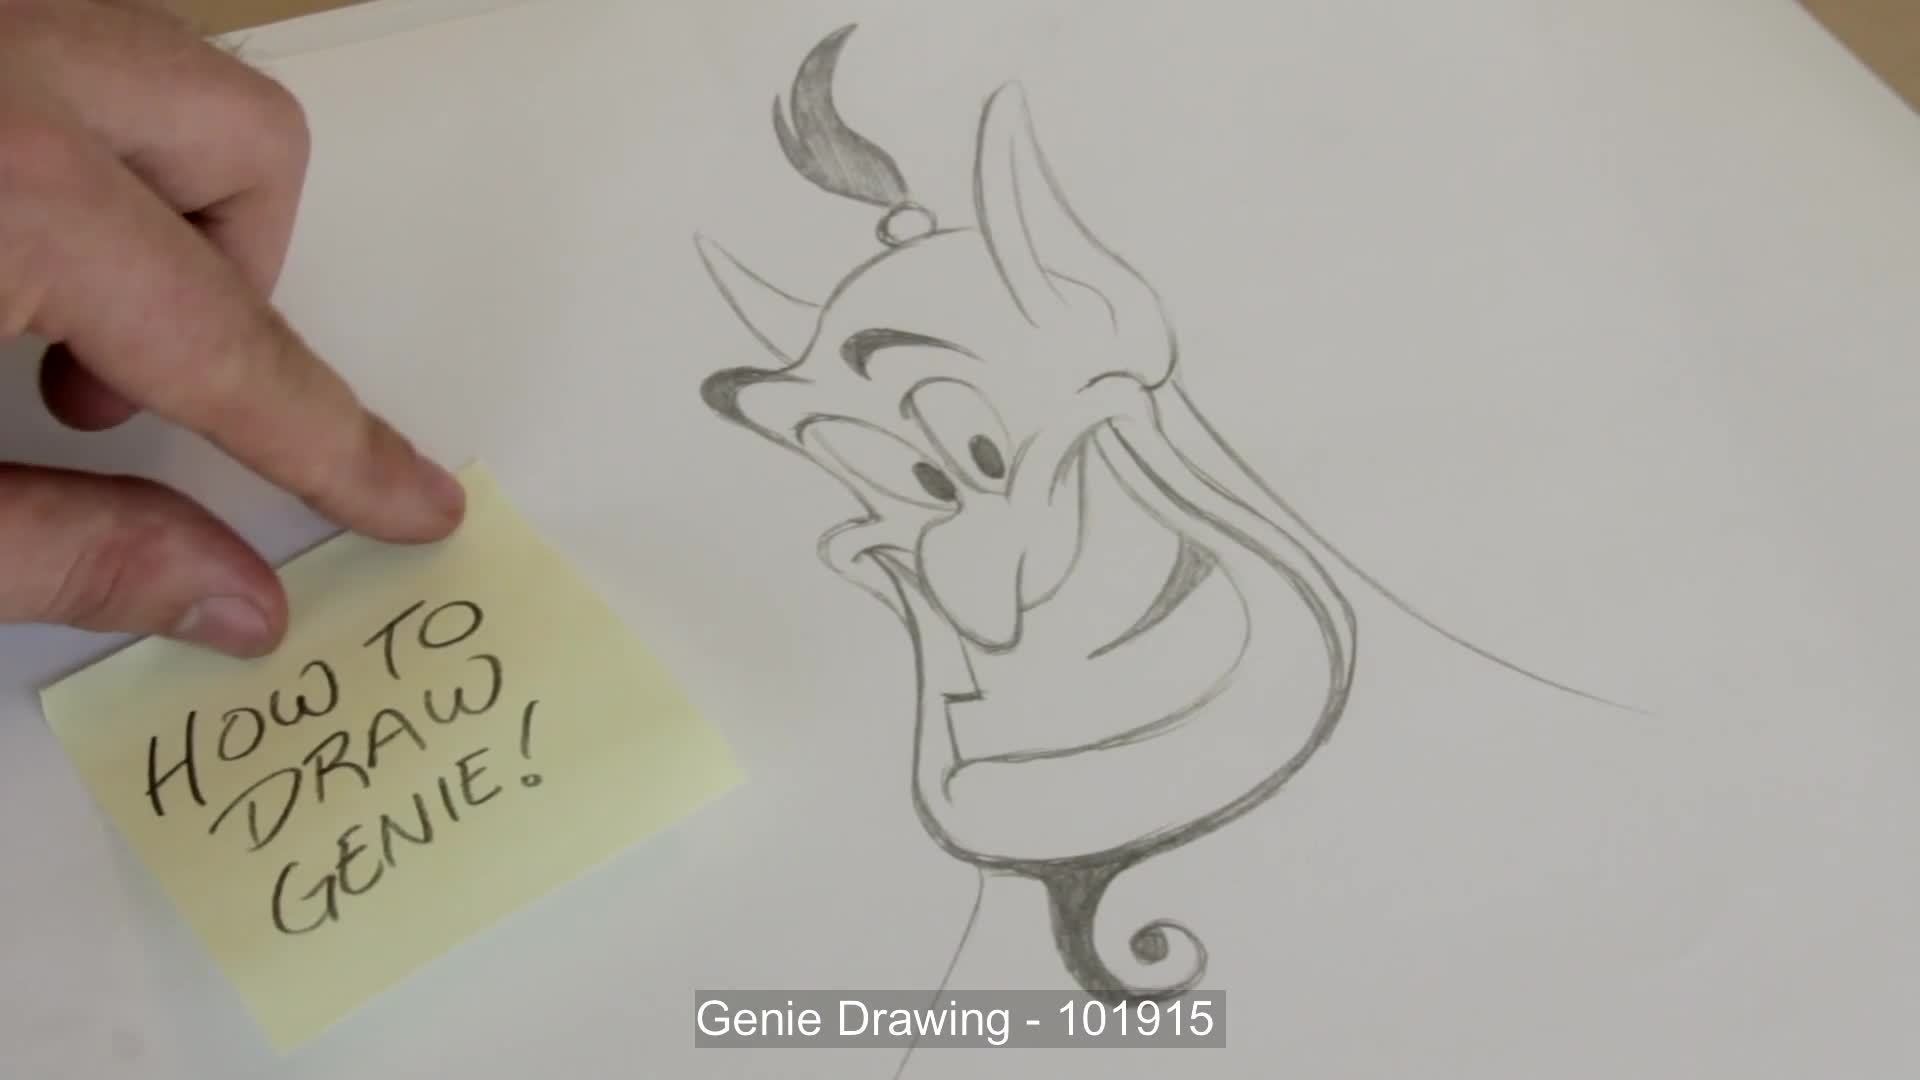 how to draw characters from disney